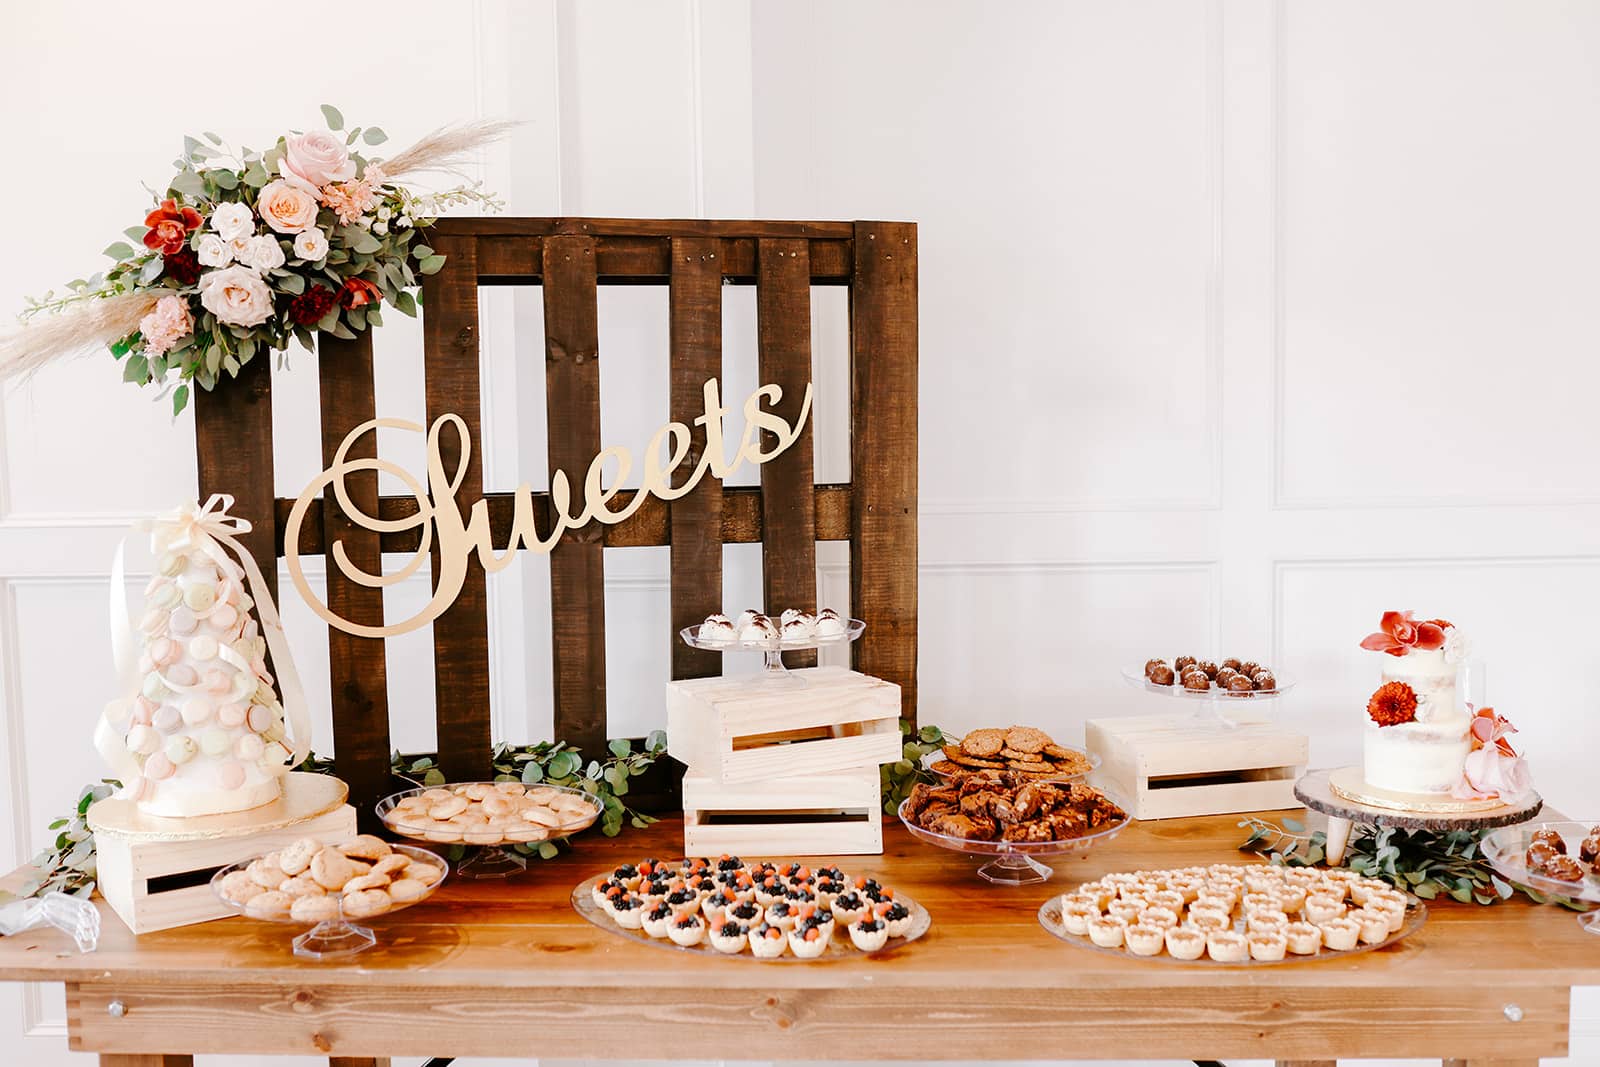 Dessert table at wedding covered in treats